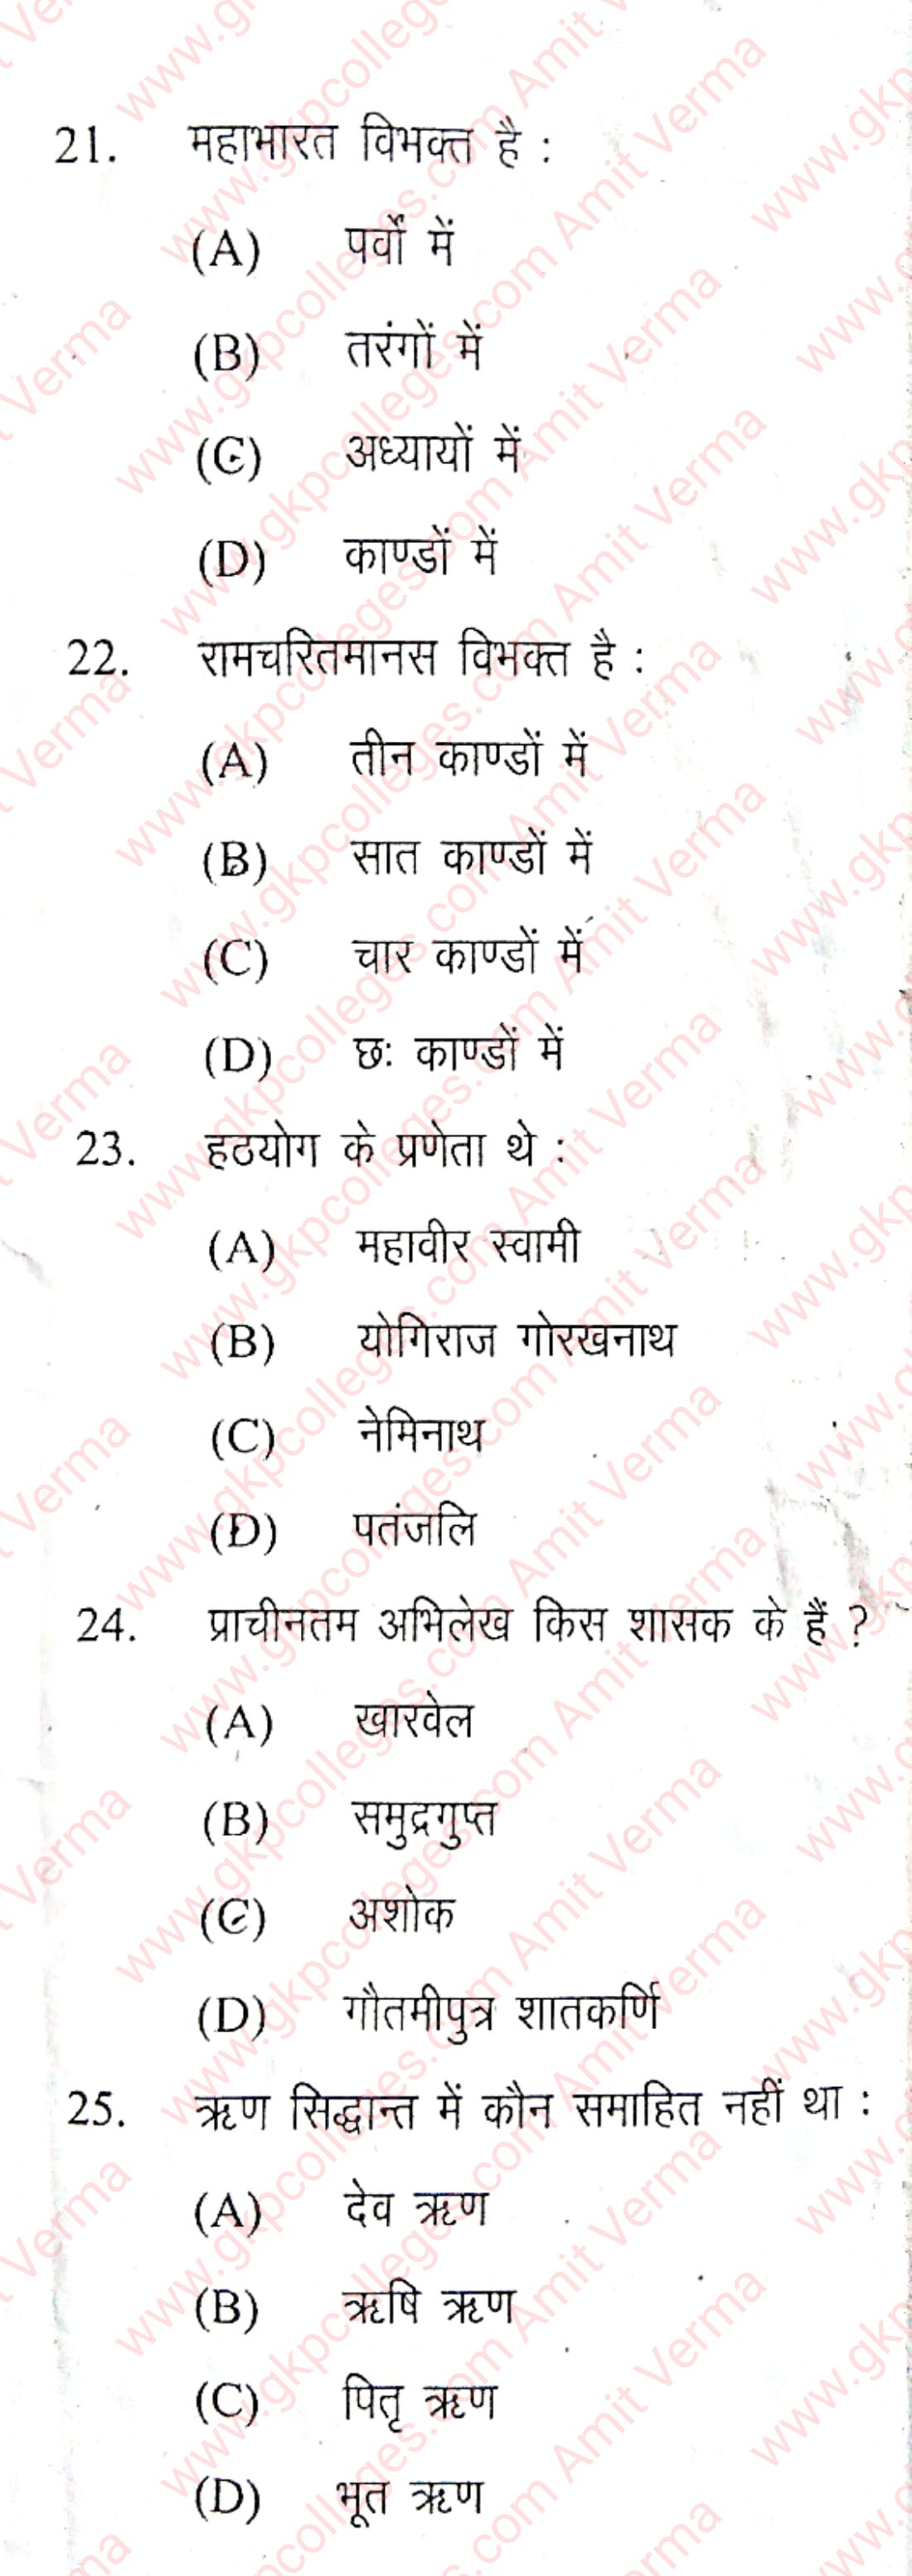 Rastra Gaurav 2022 Question Paper with Answer Key